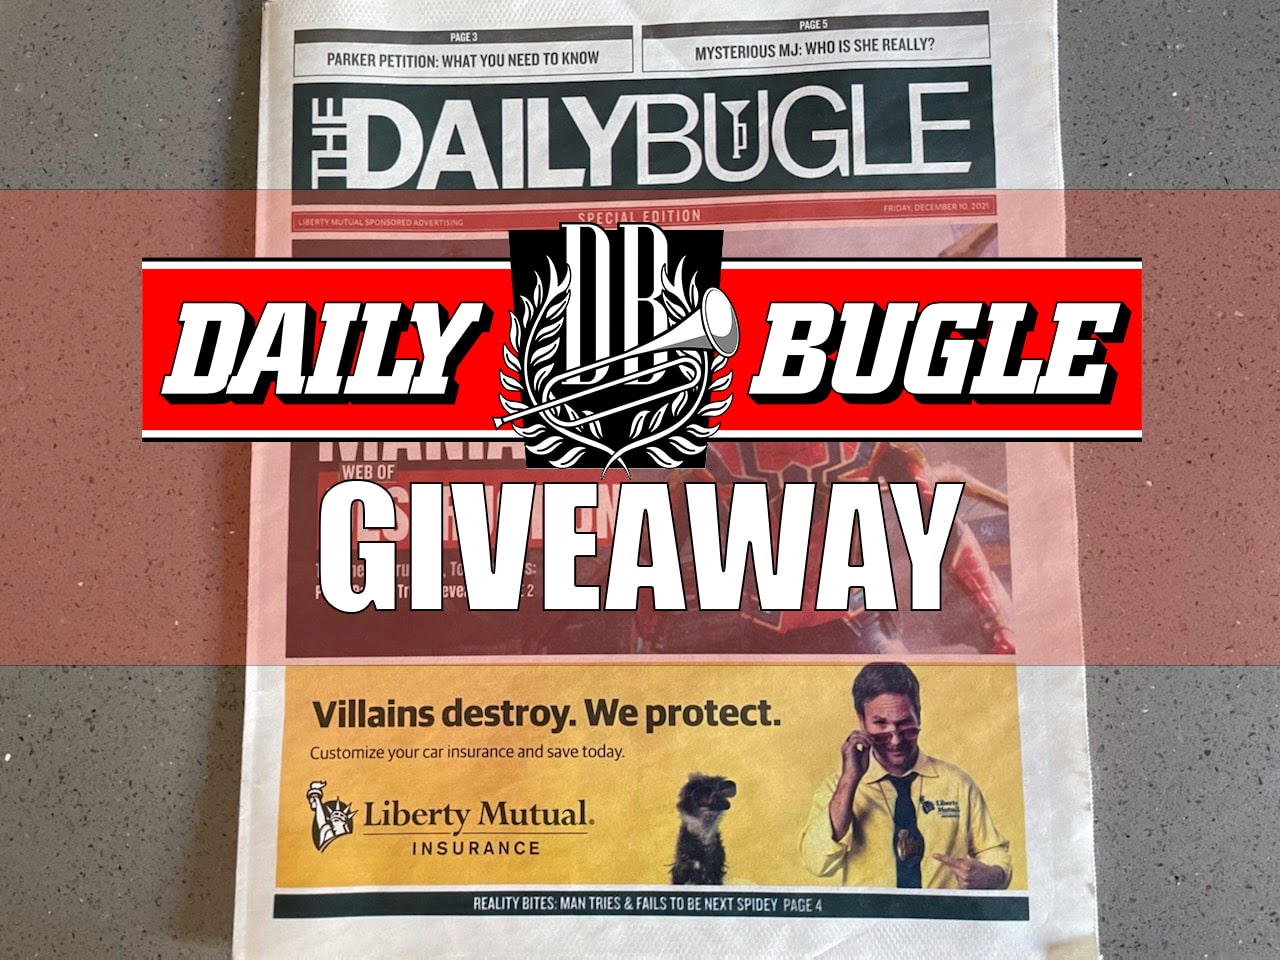 The Daily Bugle Giveaway